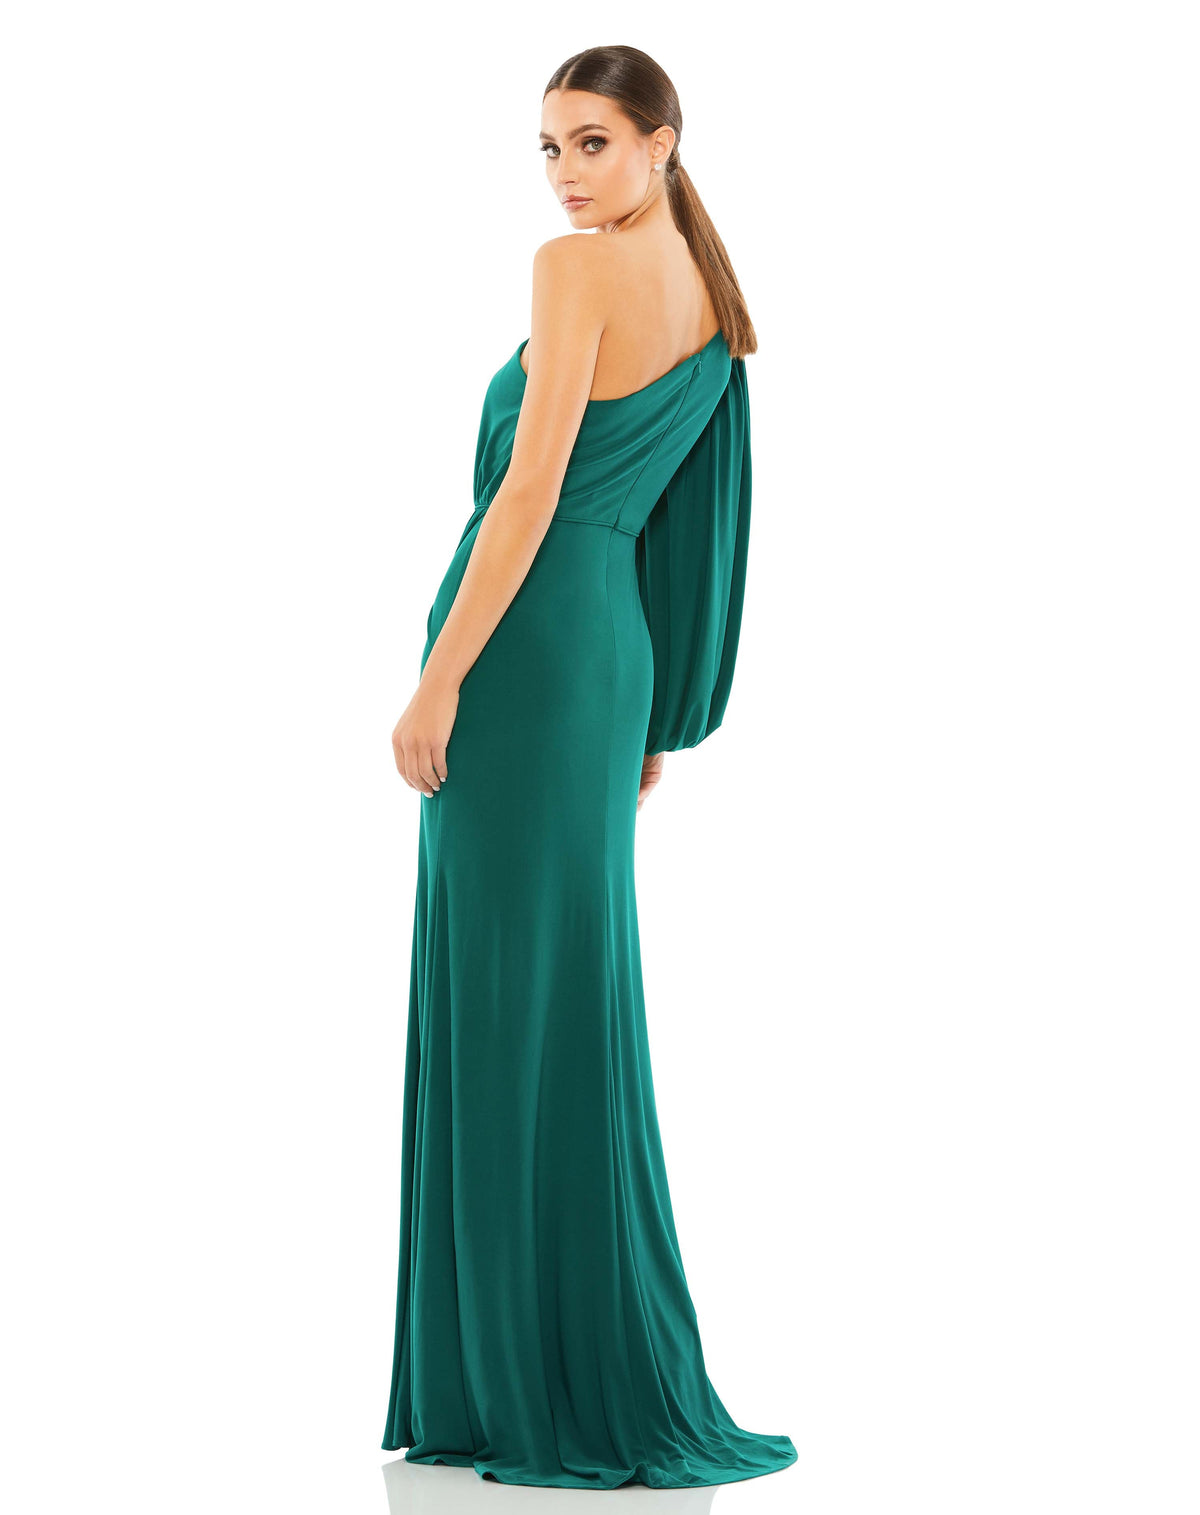 This stunning Ieena for Mac Duggal elegant, emerald green long-sleeved, evening gown is a beautiful, full-length evening dress with asymmetric detail. With one sexy-thigh high split, dress is perfect for proms, black-tie affairs, weddings and special events! back